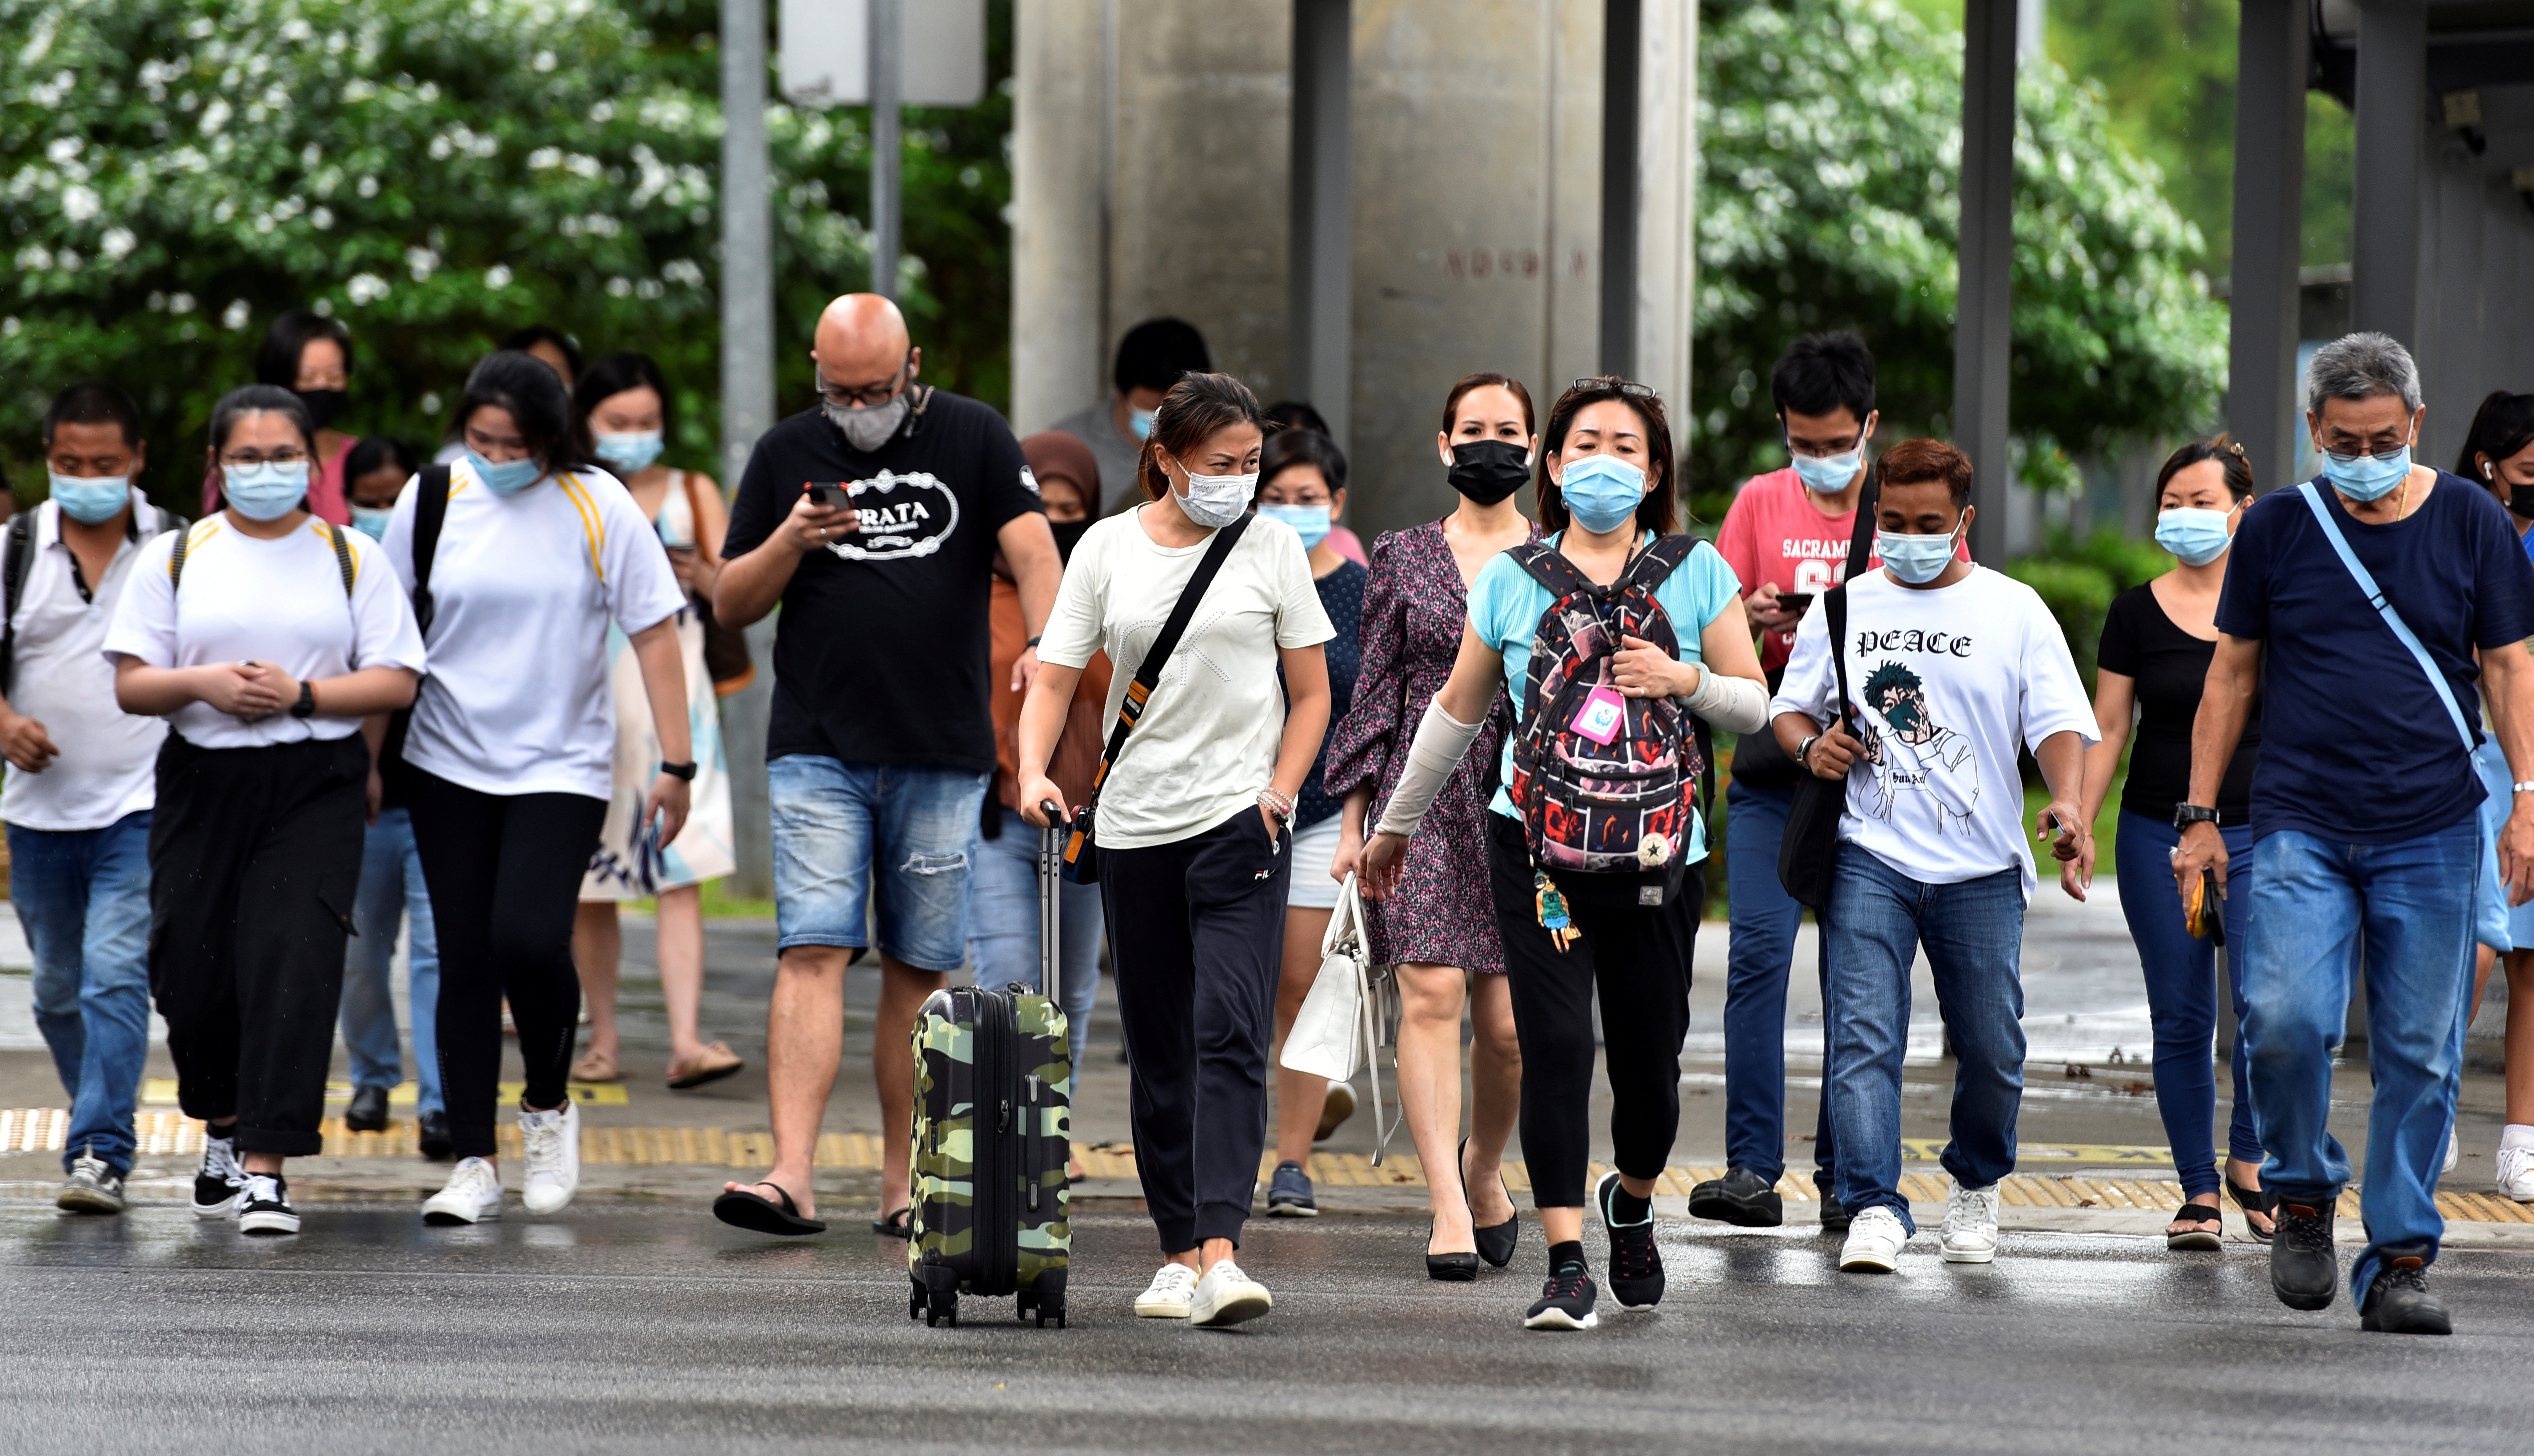 People wearing face masks cross a road amid the coronavirus disease (COVID-19) outbreak in Singapore